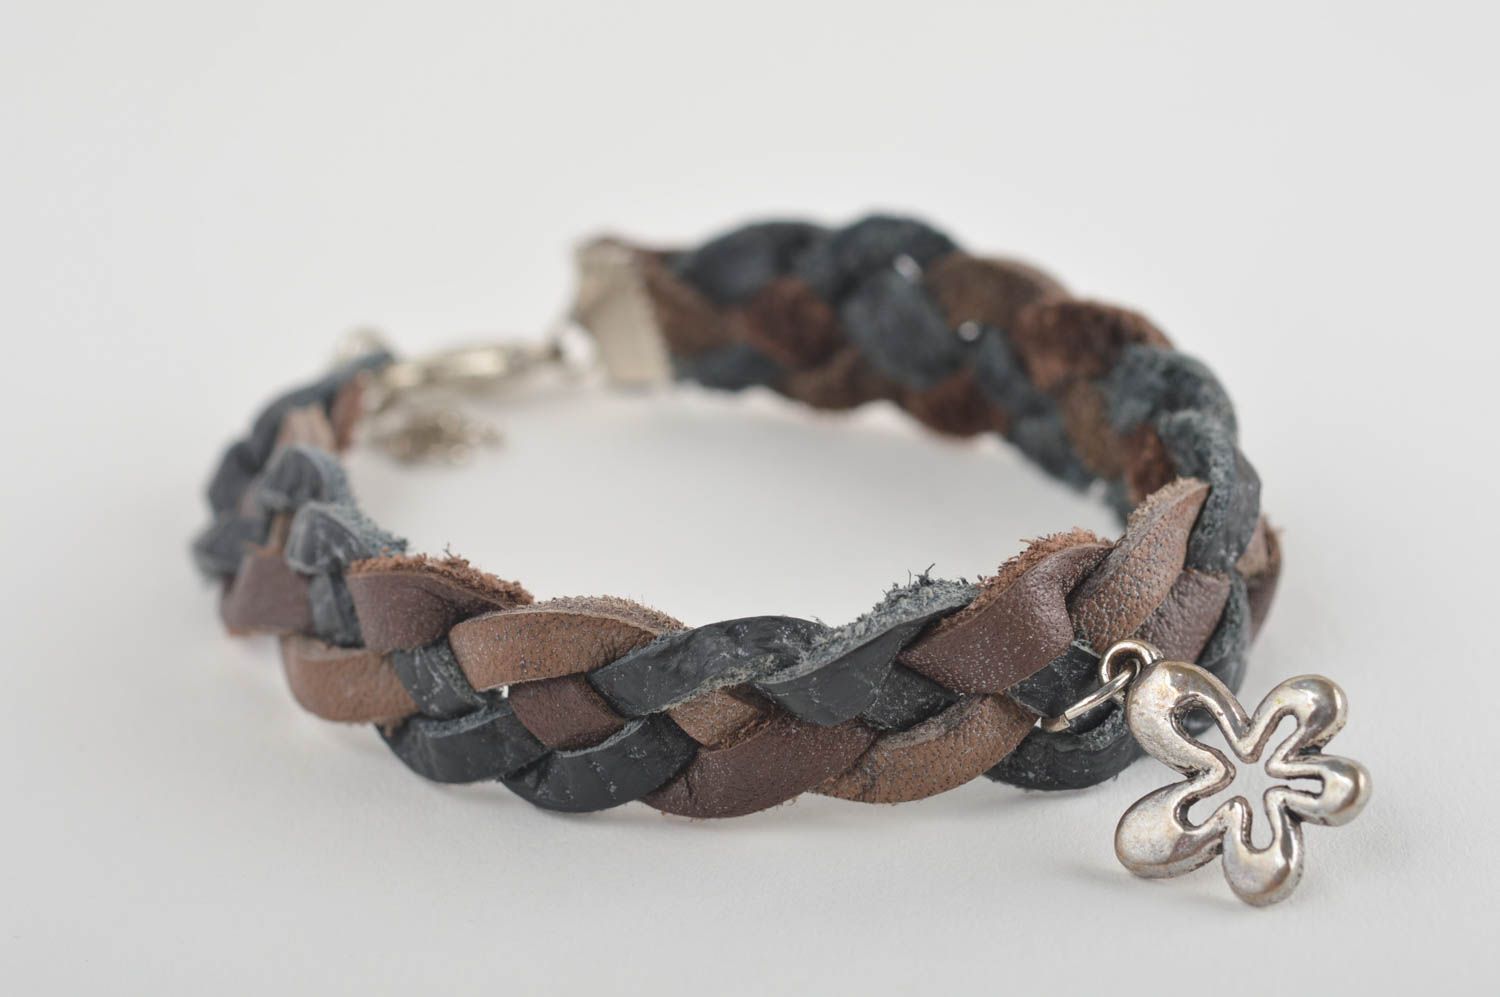 Homemade leather accessories wrist bracelet woven bracelet gifts for women photo 5